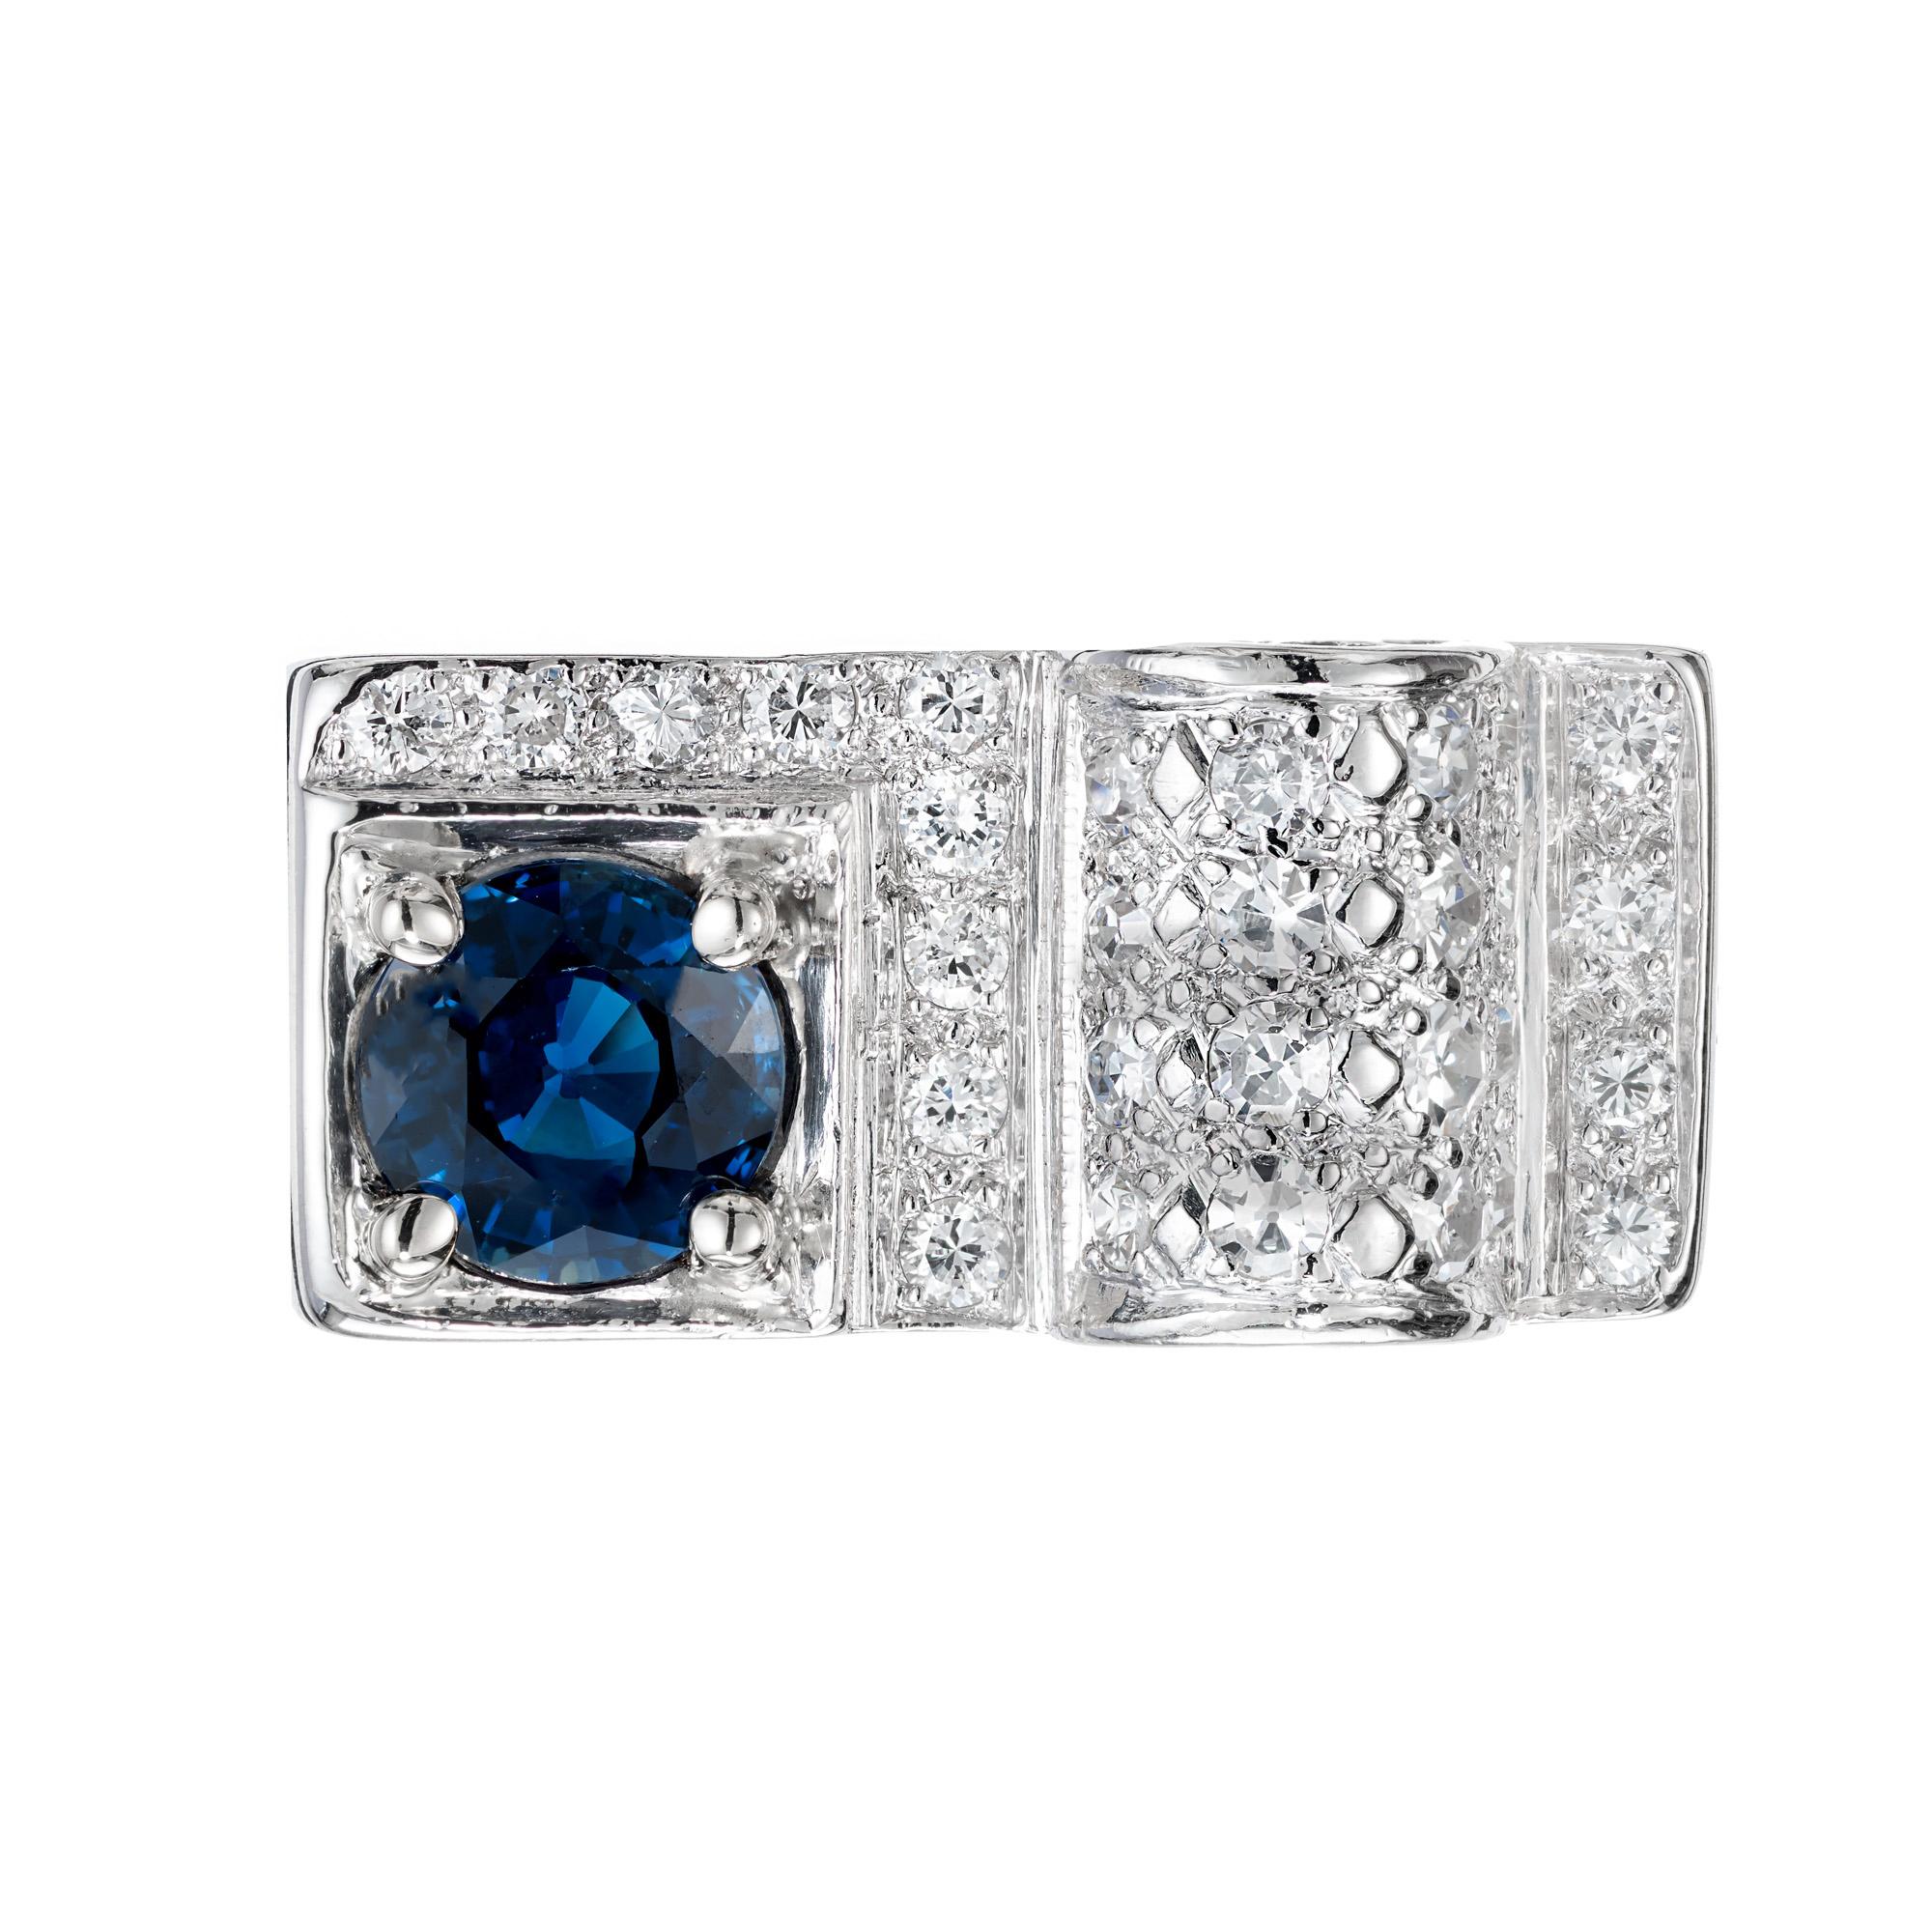  1940’s late Art Deco sapphire and diamond ring. 1.00 round sapphire gemstone, set in a platinum handmade setting with 29 pave set diamonds. This truly unique ring  has a flat top with a raised domed section all pave set diamonds.

1 round sapphire